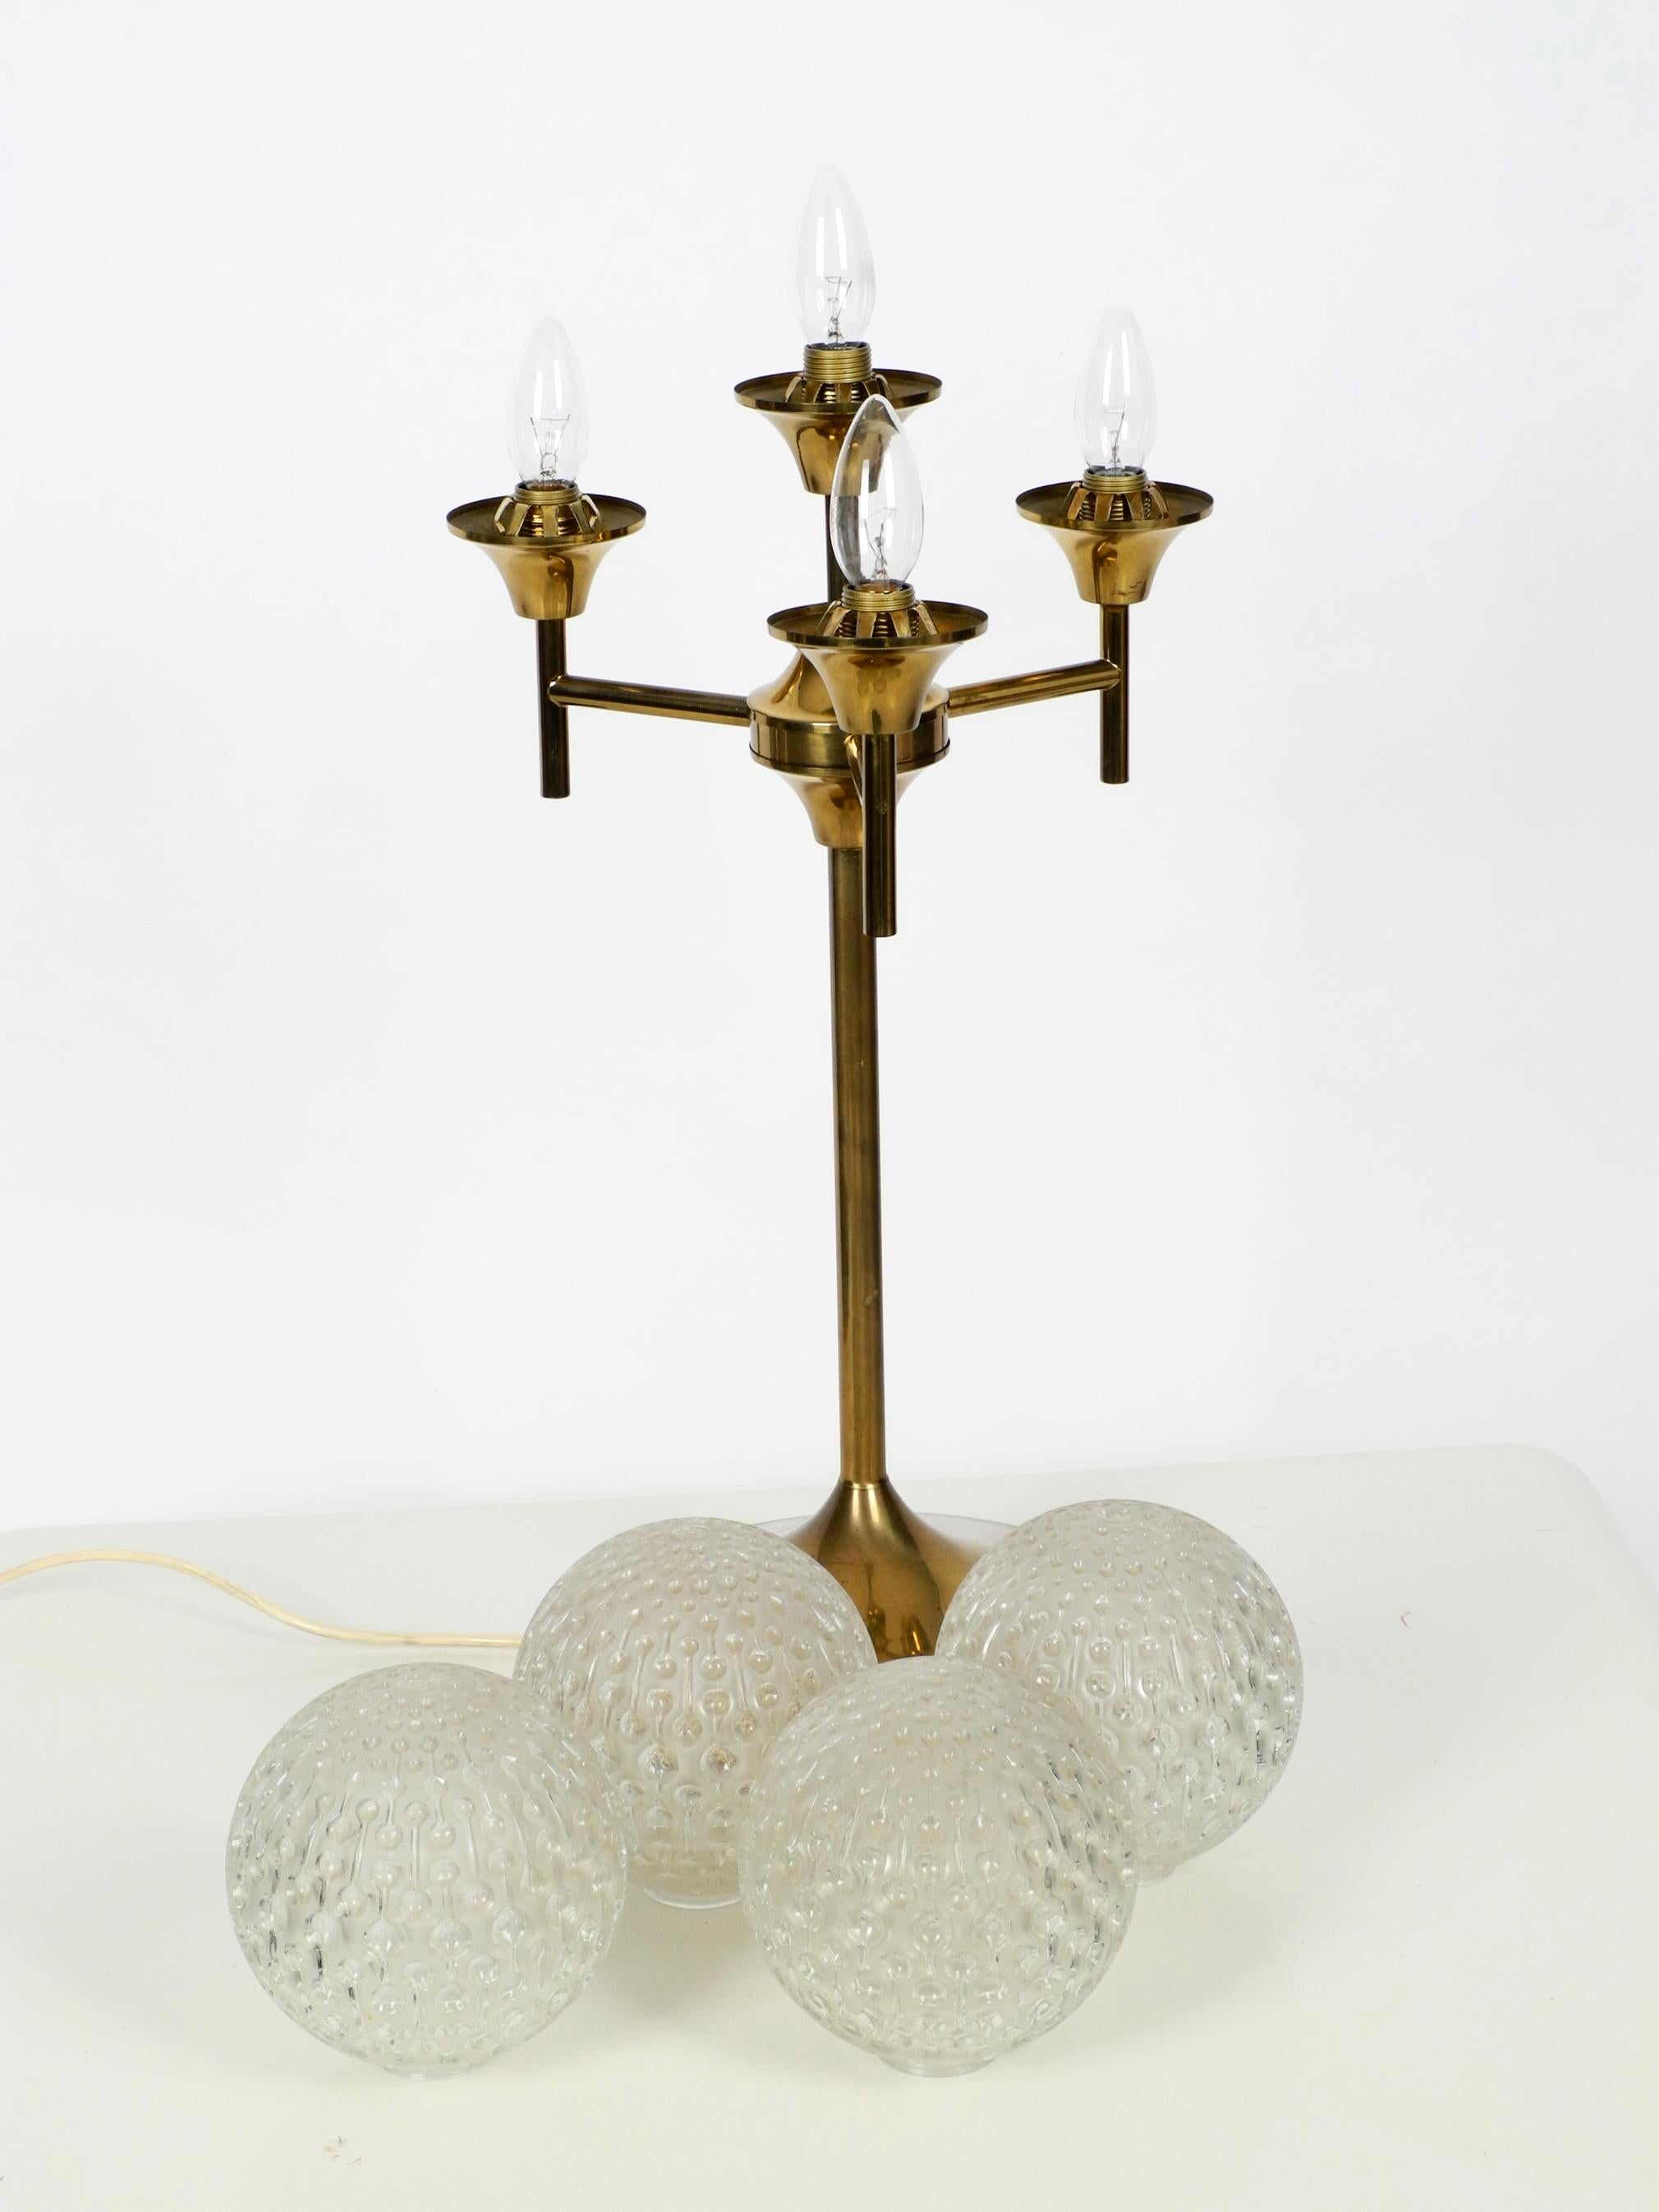 Exceptional Large 1960s Full Brass Table or Floor Lamp with 4 Glass Balls 4